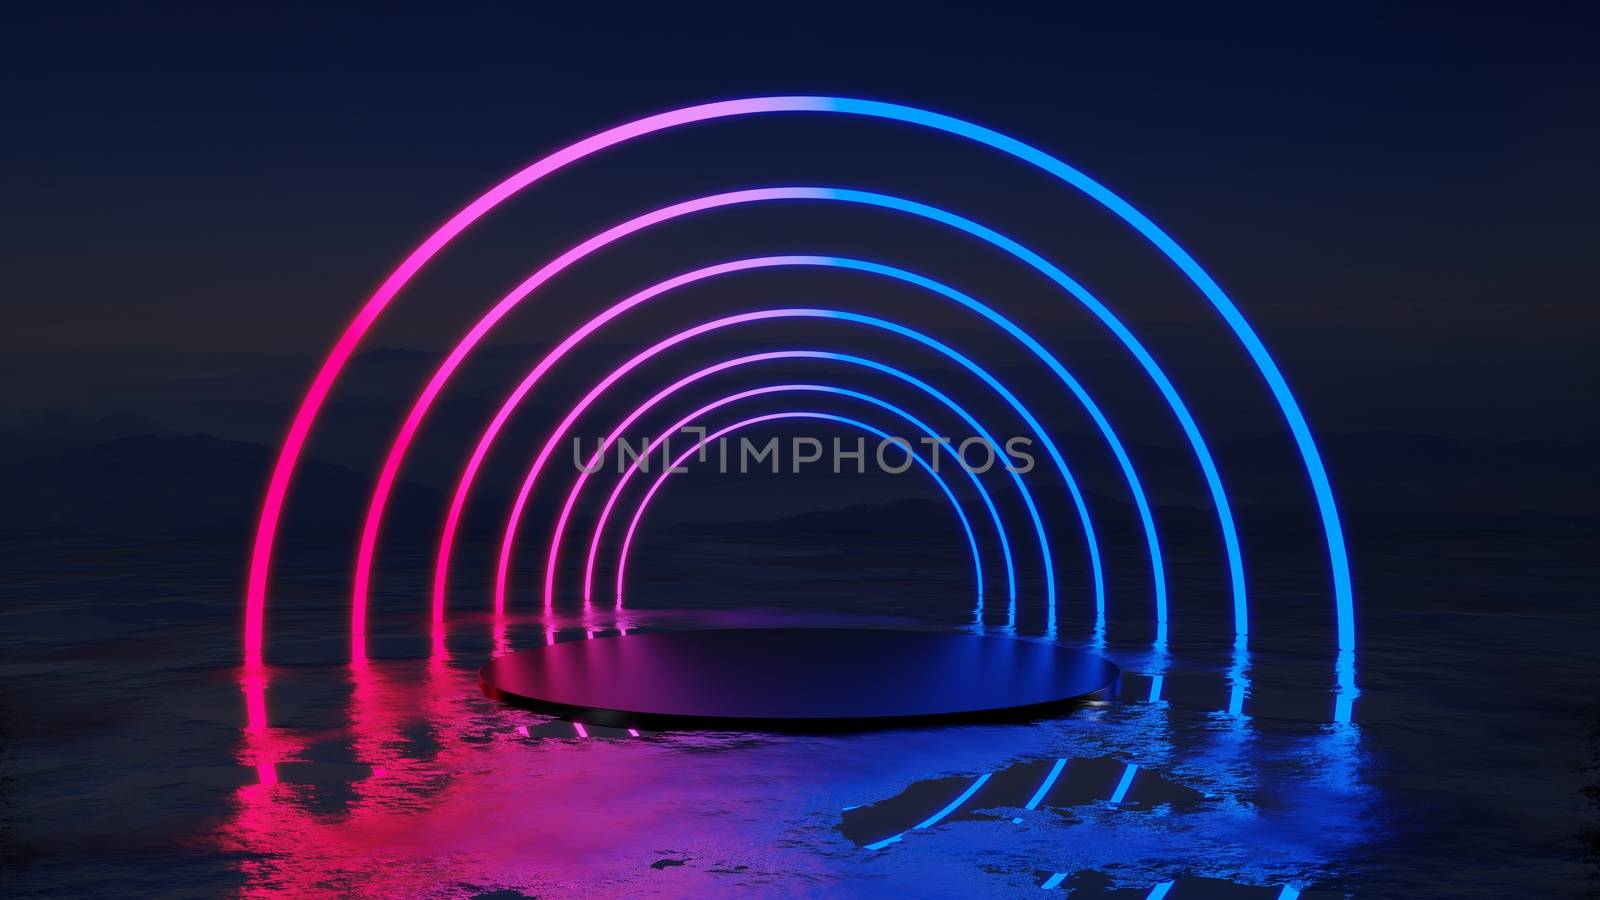 Abstract background with neon circles and cylindrical pedestal against the background of mountains. 3D illustration. Empty space for your products